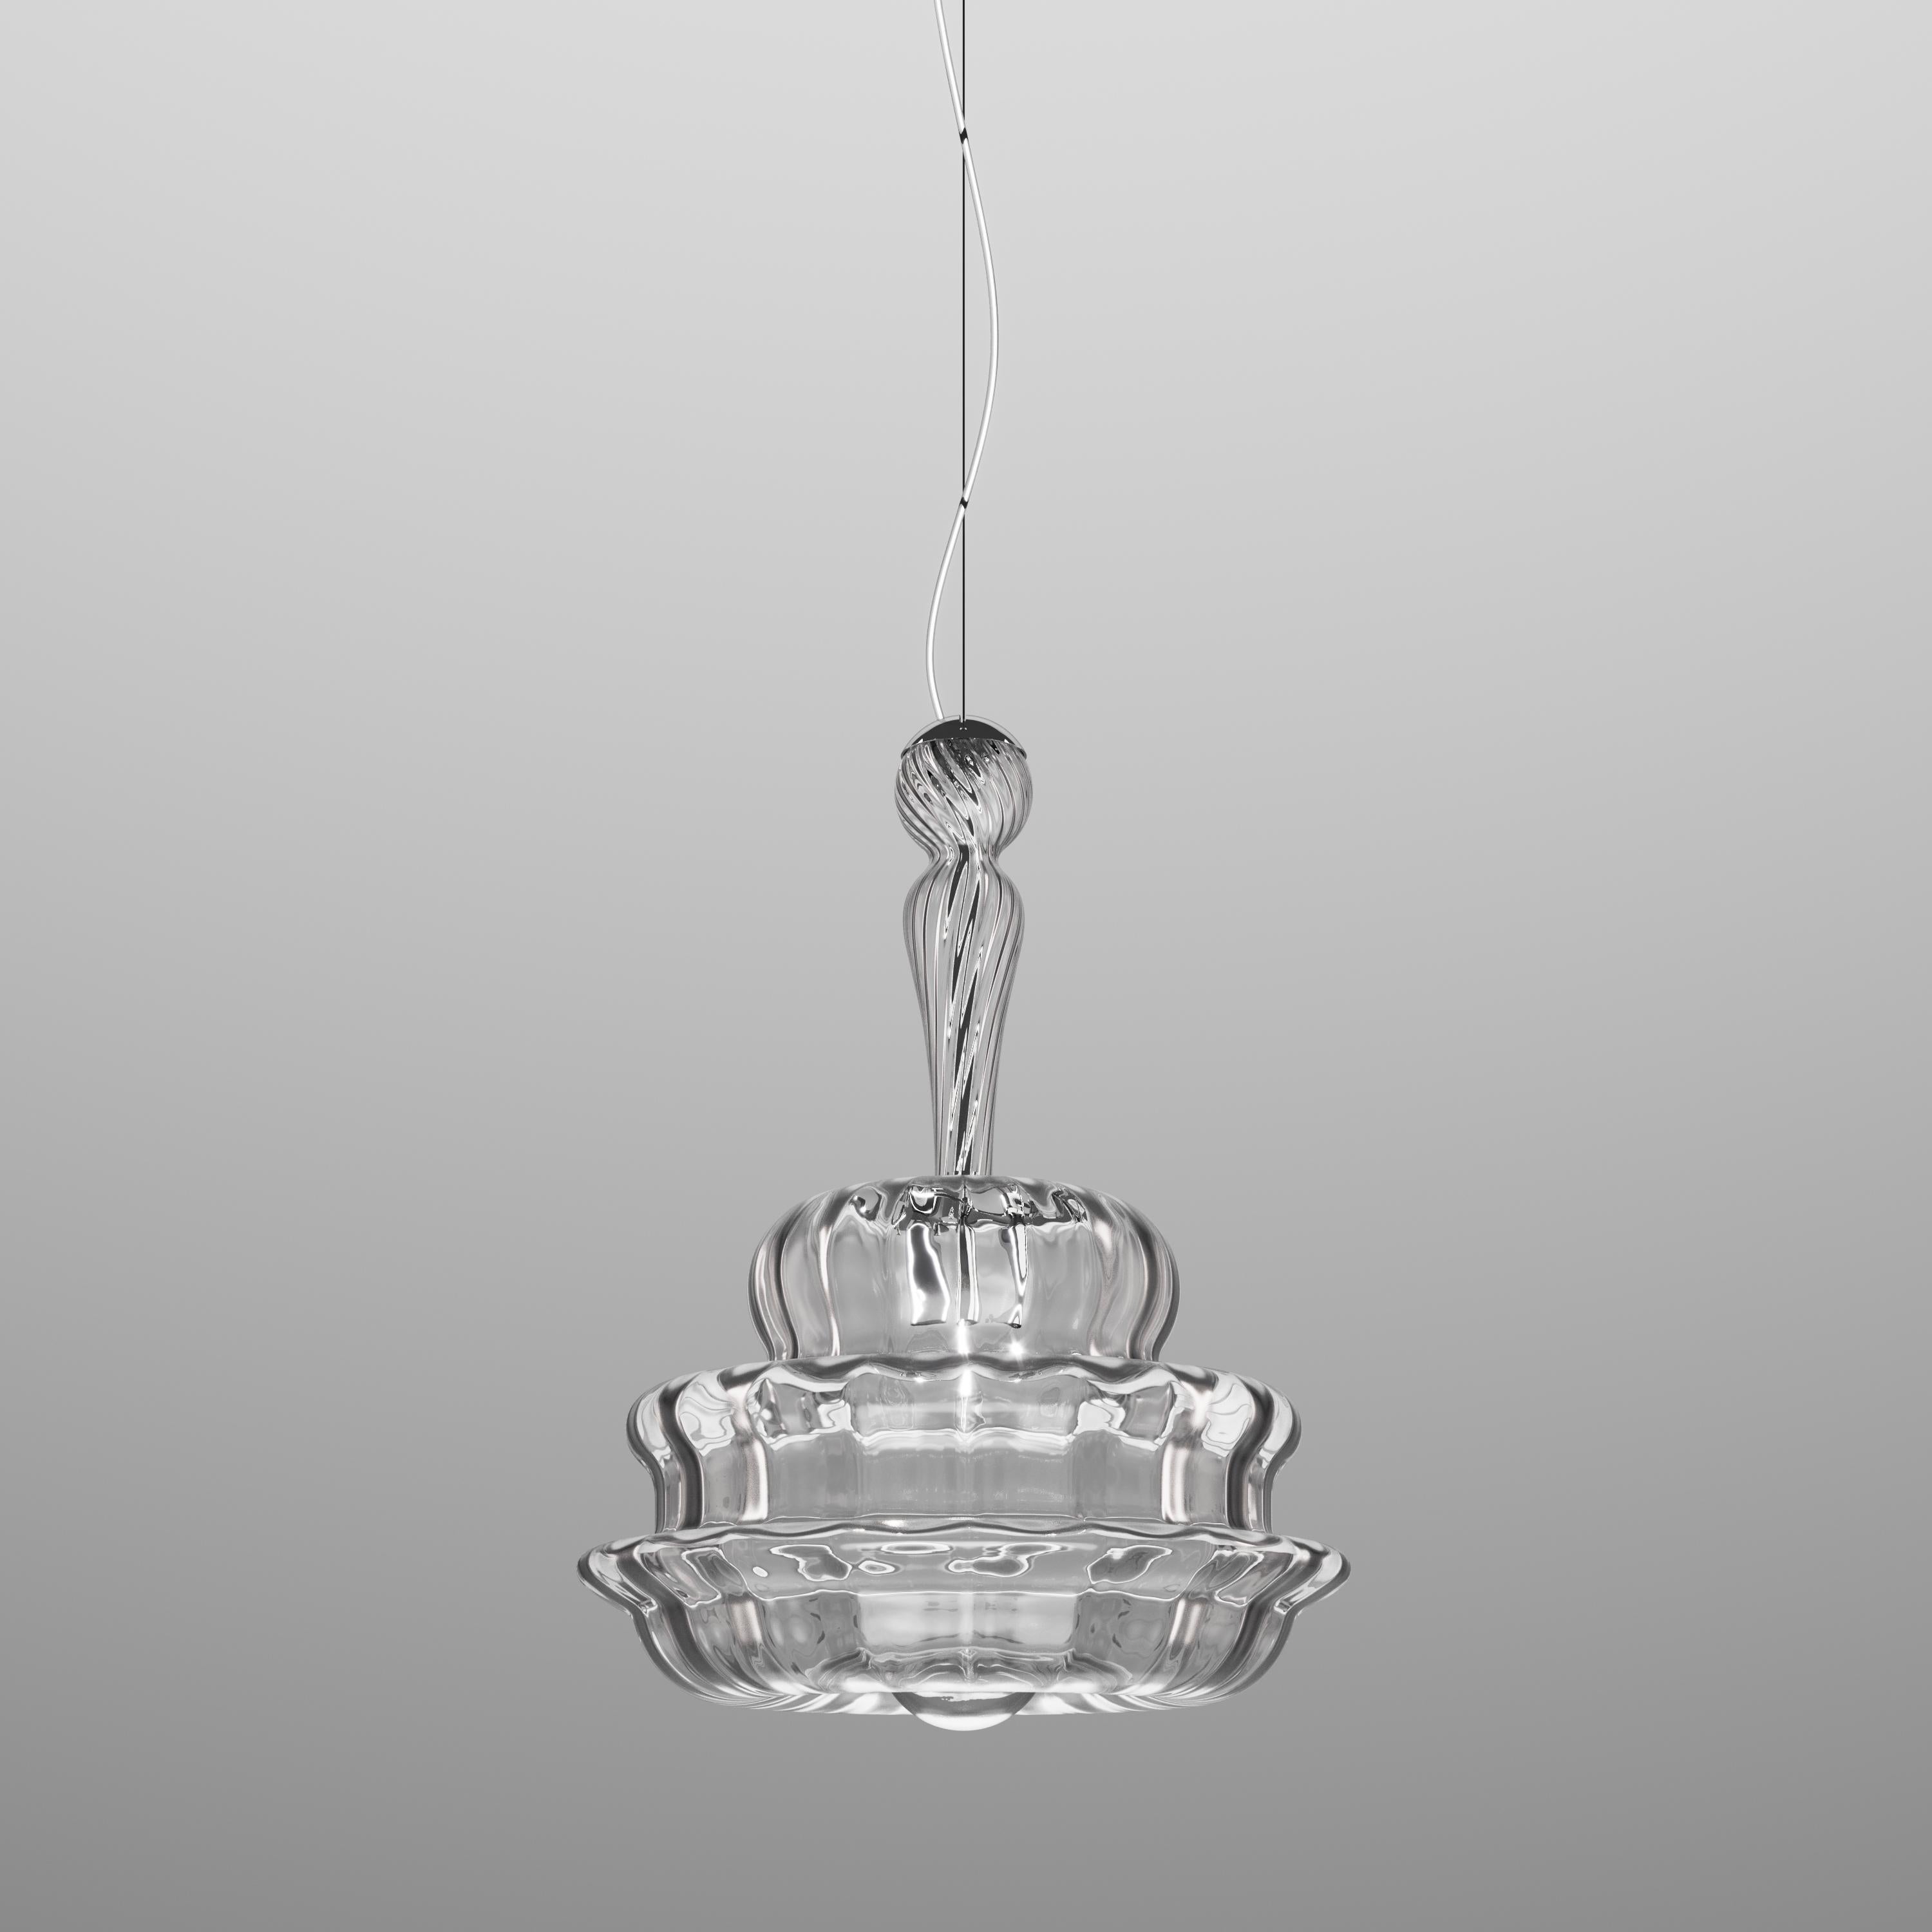 The idea behind the collection Novecento is to reduce the traditional Murano chandelier to its most recognizable element, its profile. This shape is then reconstructed in a 360º glass outline, which keeps the same characteristics of the original